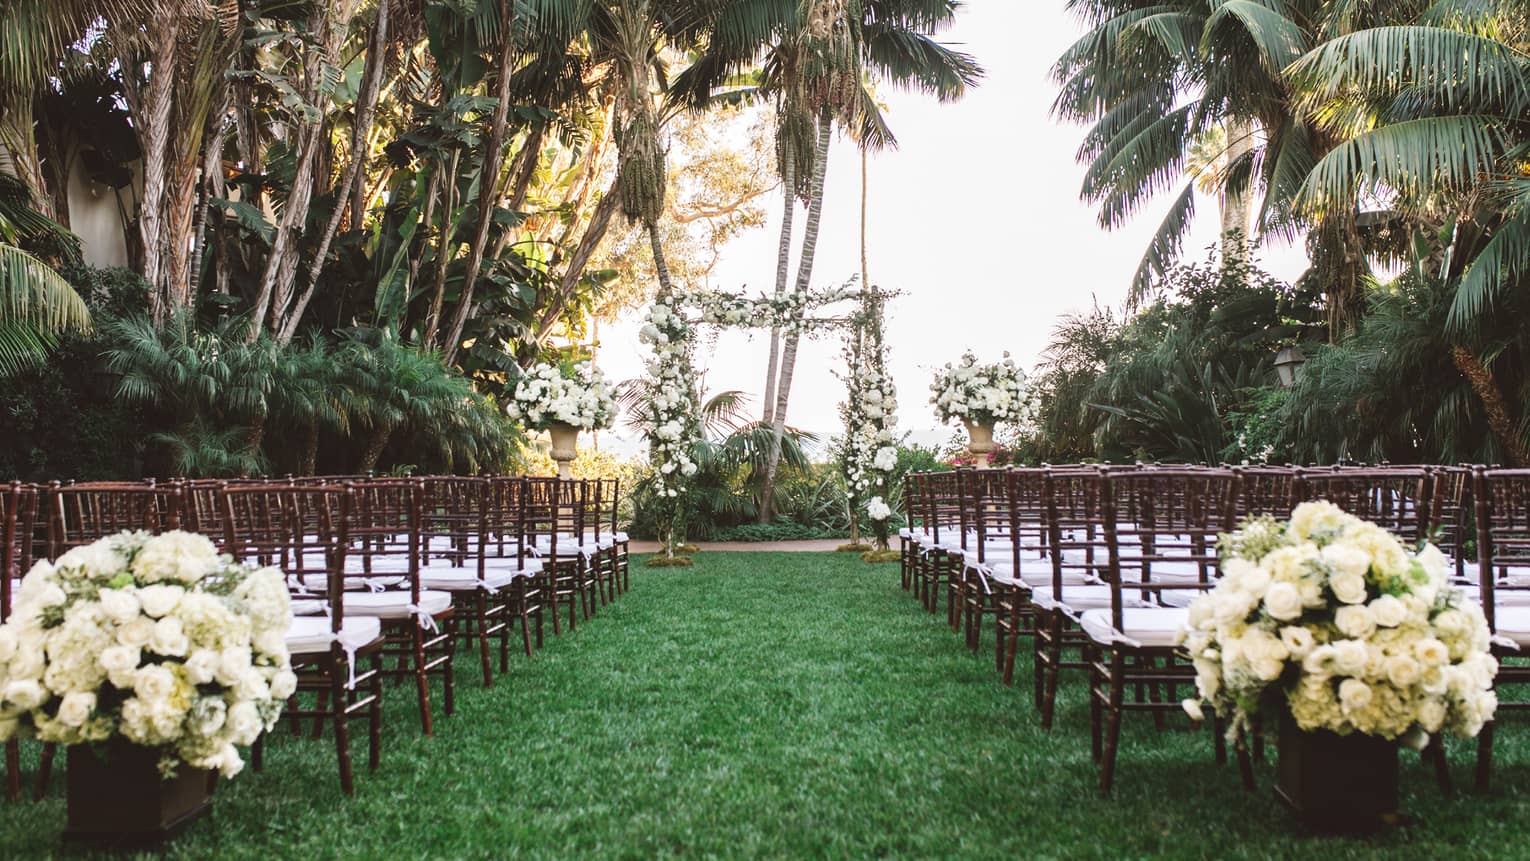 Wedding on Mariposa garden lawn, white roses and rows of white chairs on sides of aisle to altar  